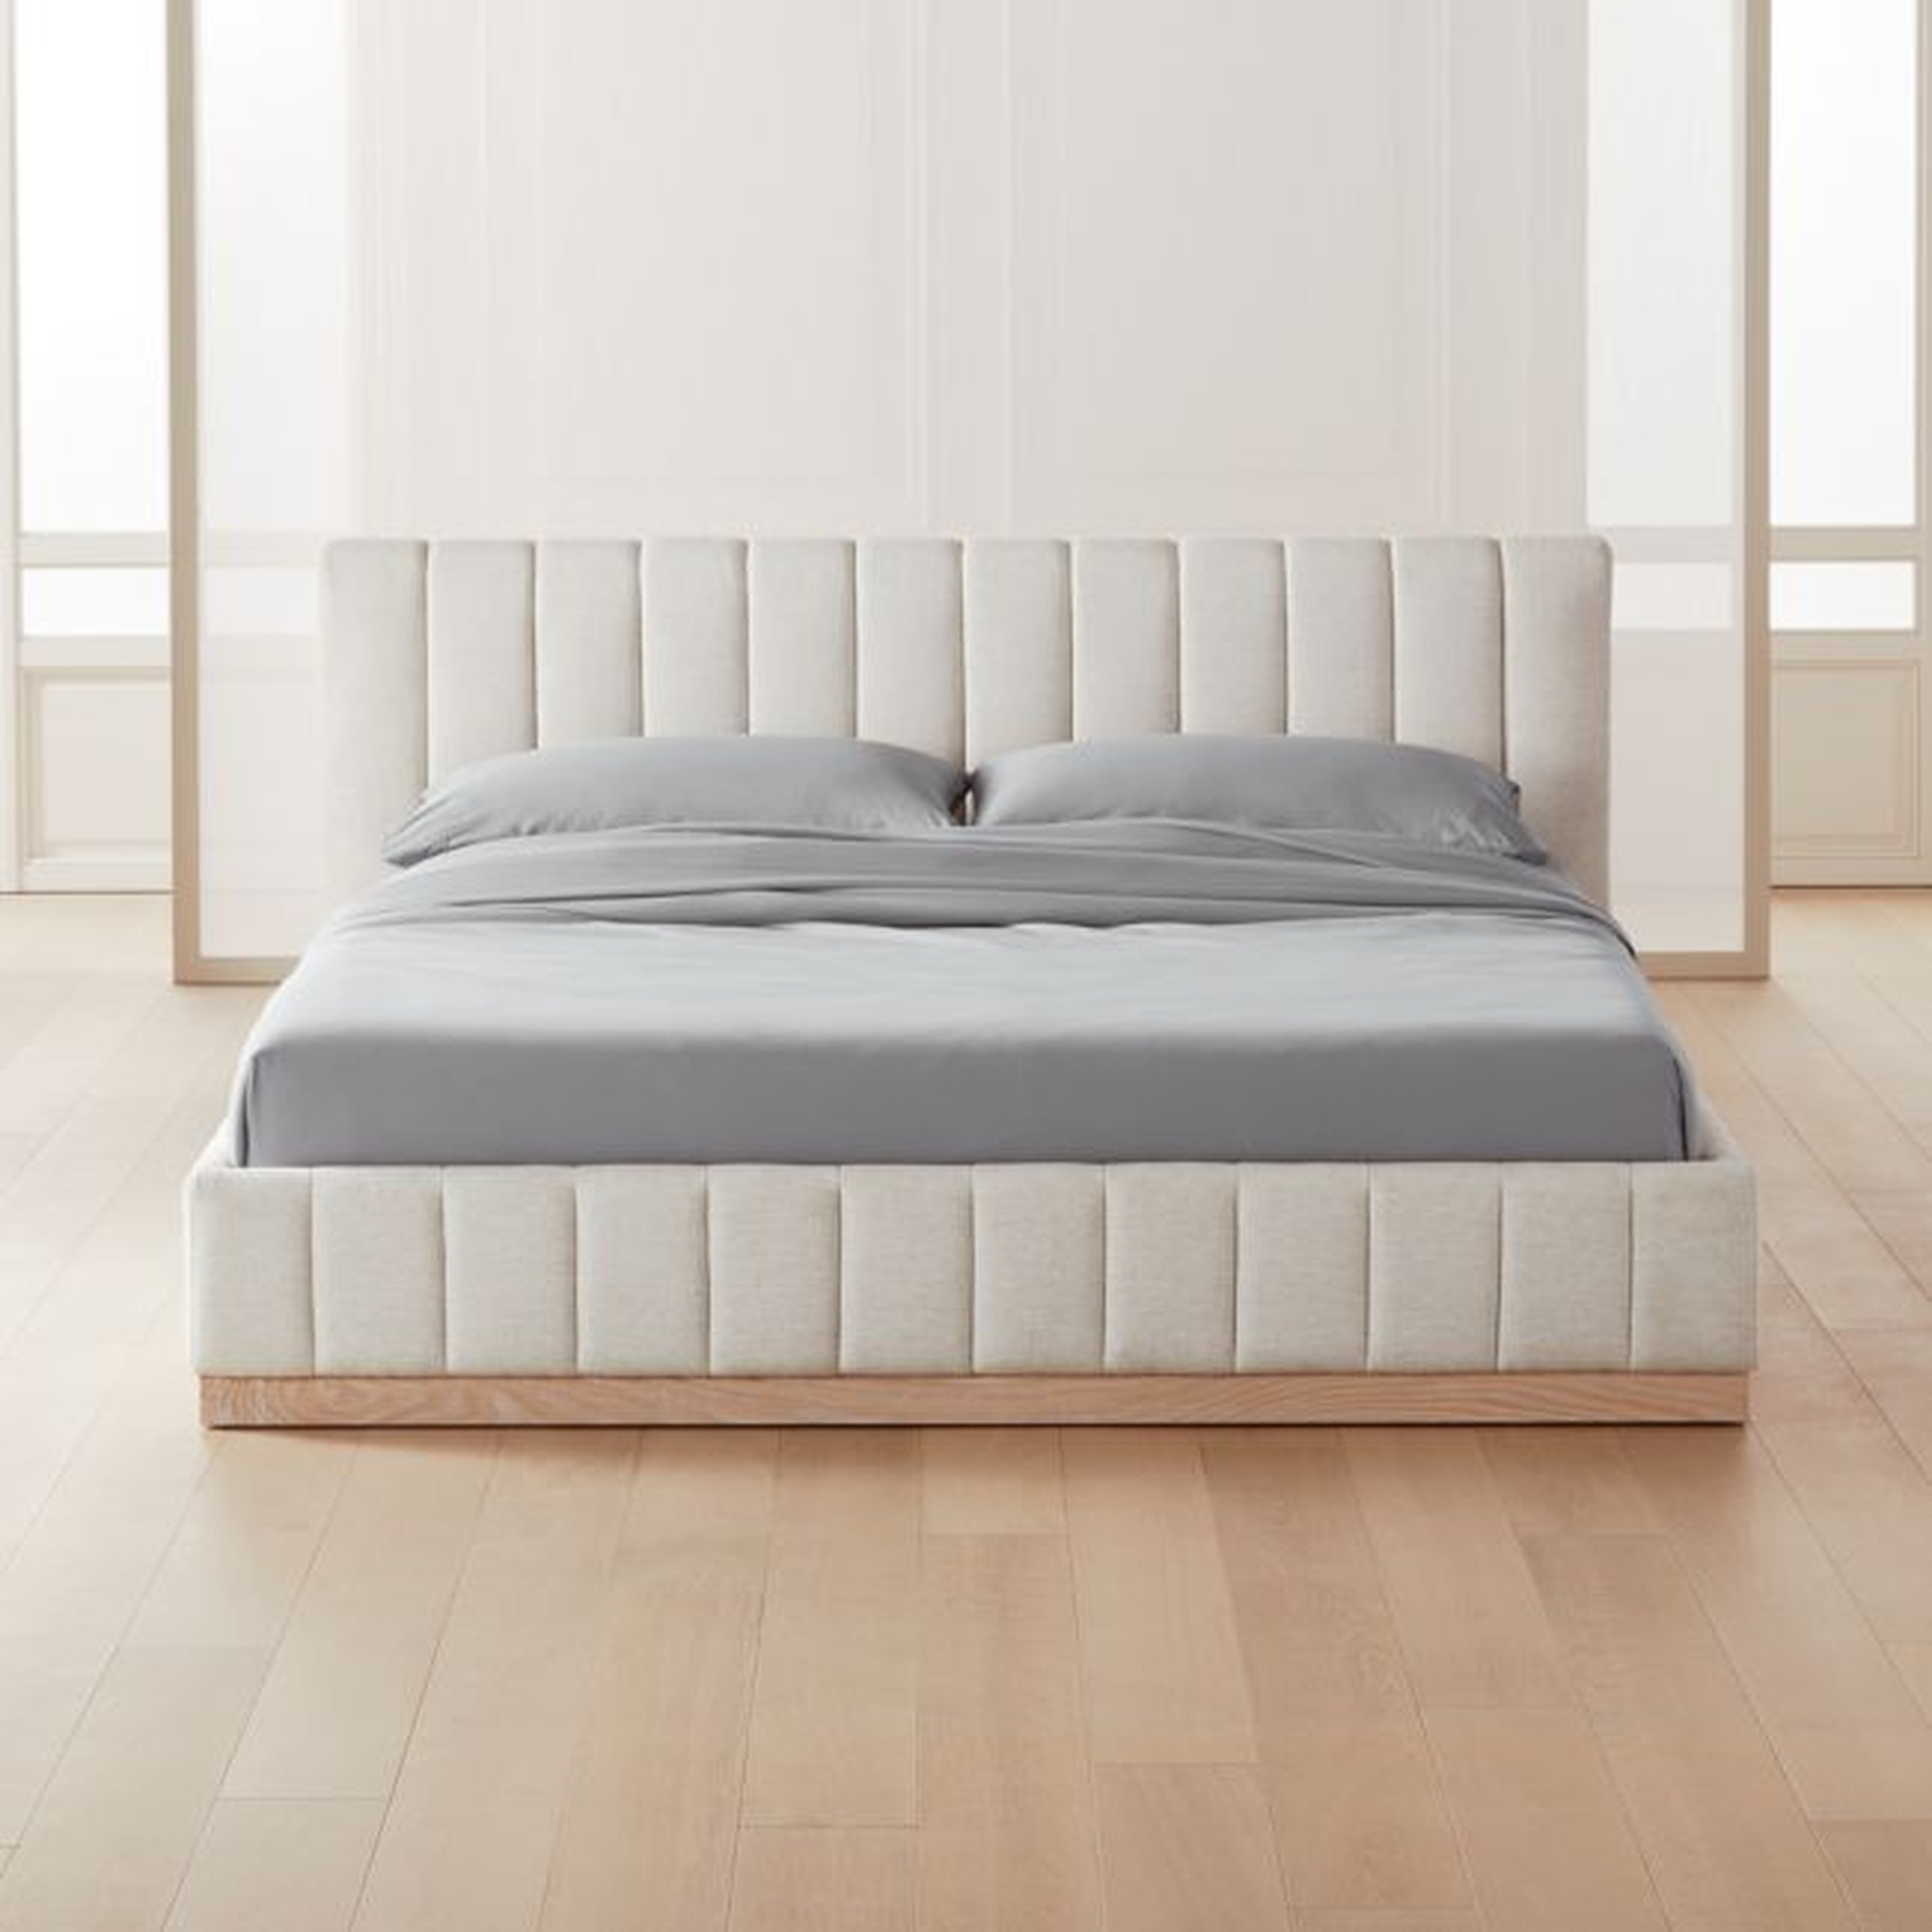 Forte Channeled White California King Bed - CB2